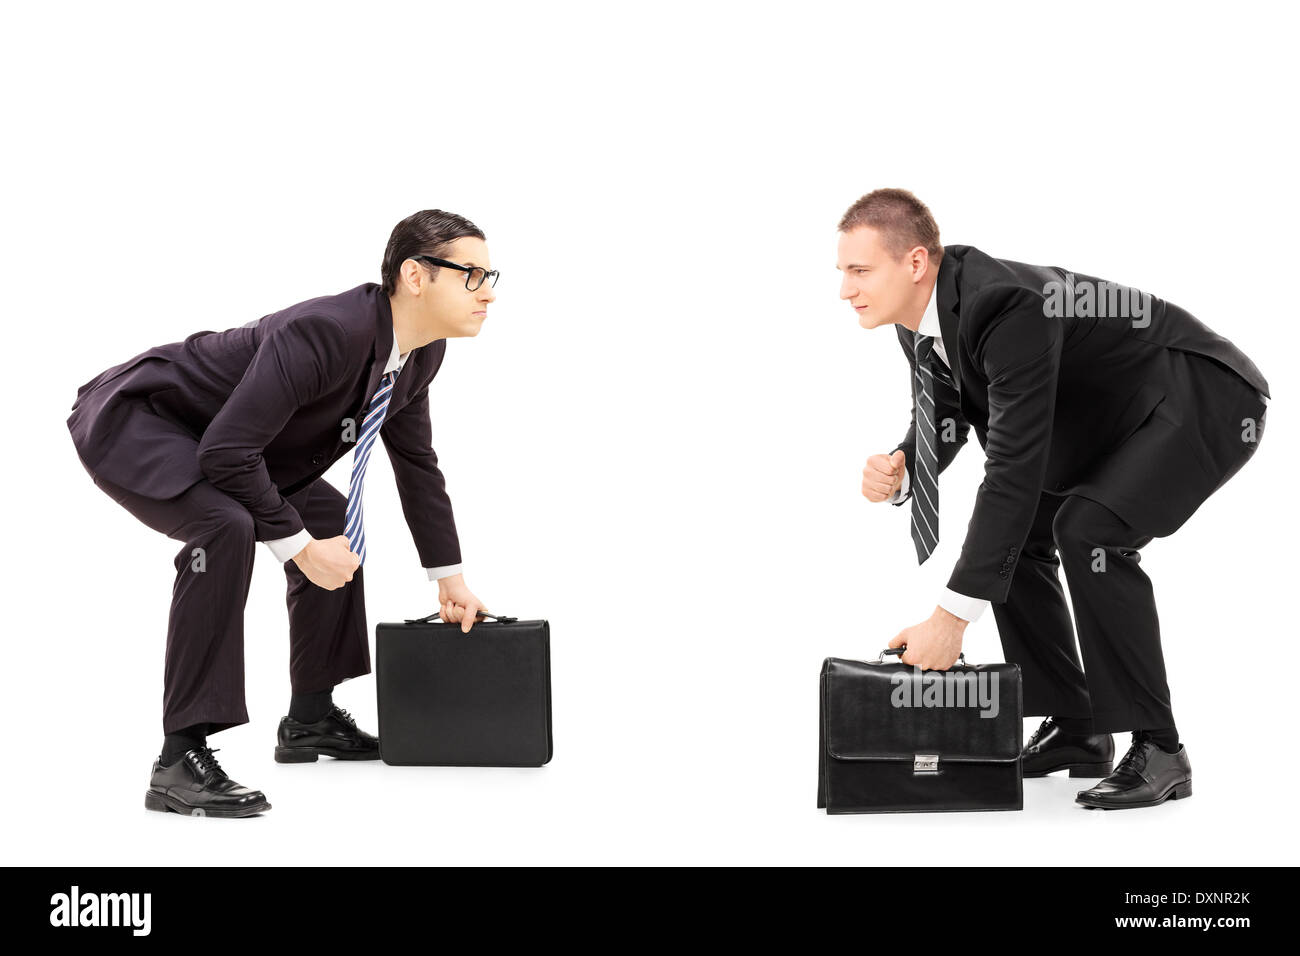 Two businessmen standing in sumo wrestling stance Stock Photo